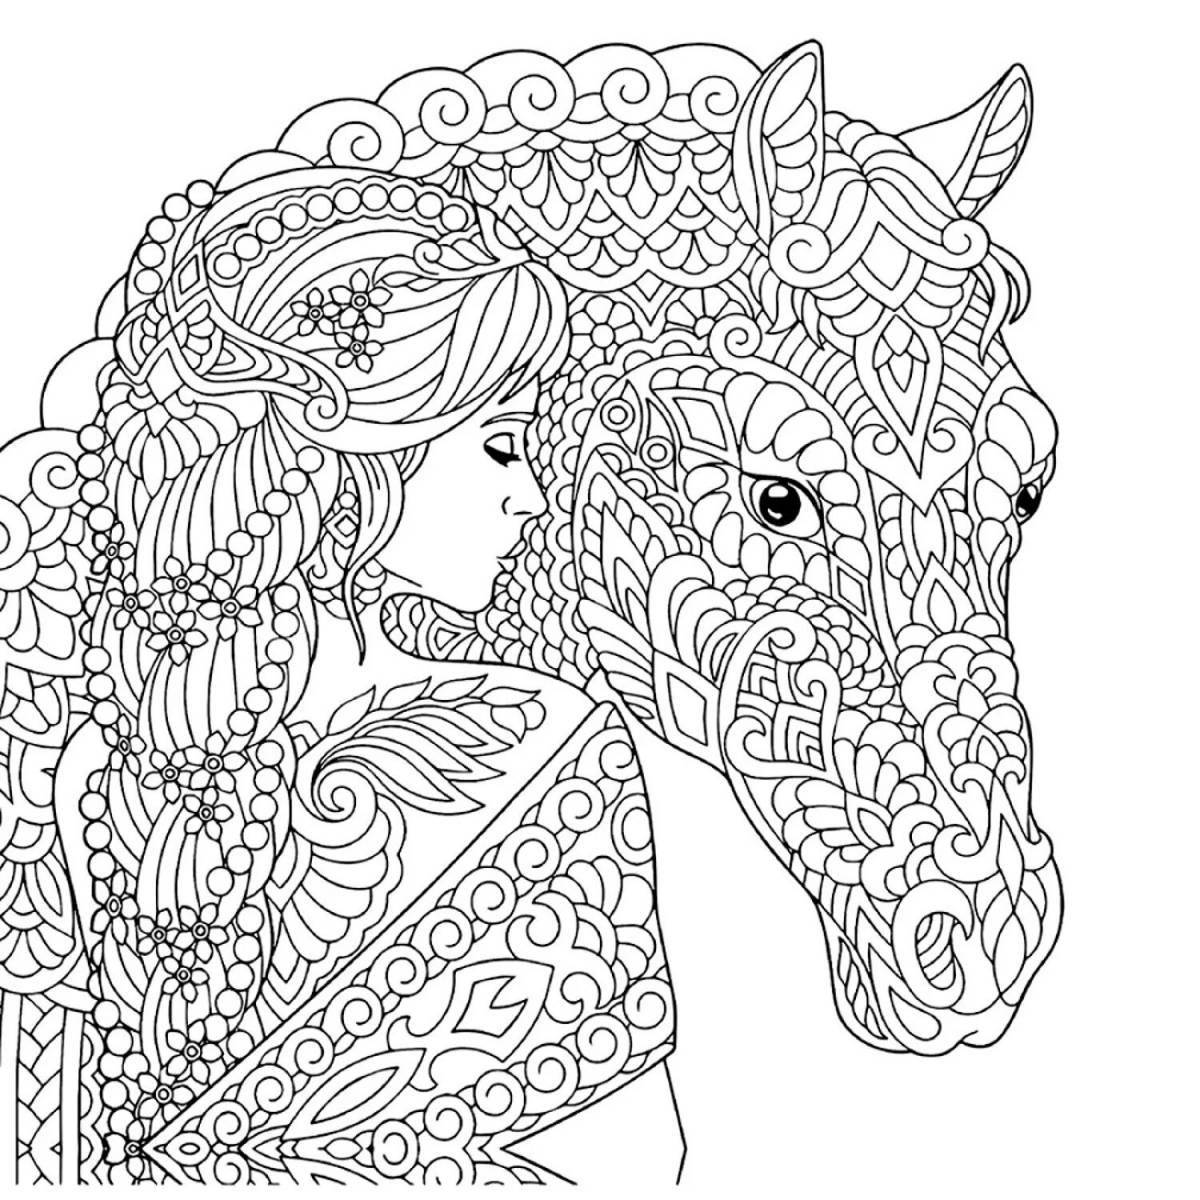 Exquisite coloring for girls 10 years old - very beautiful animals